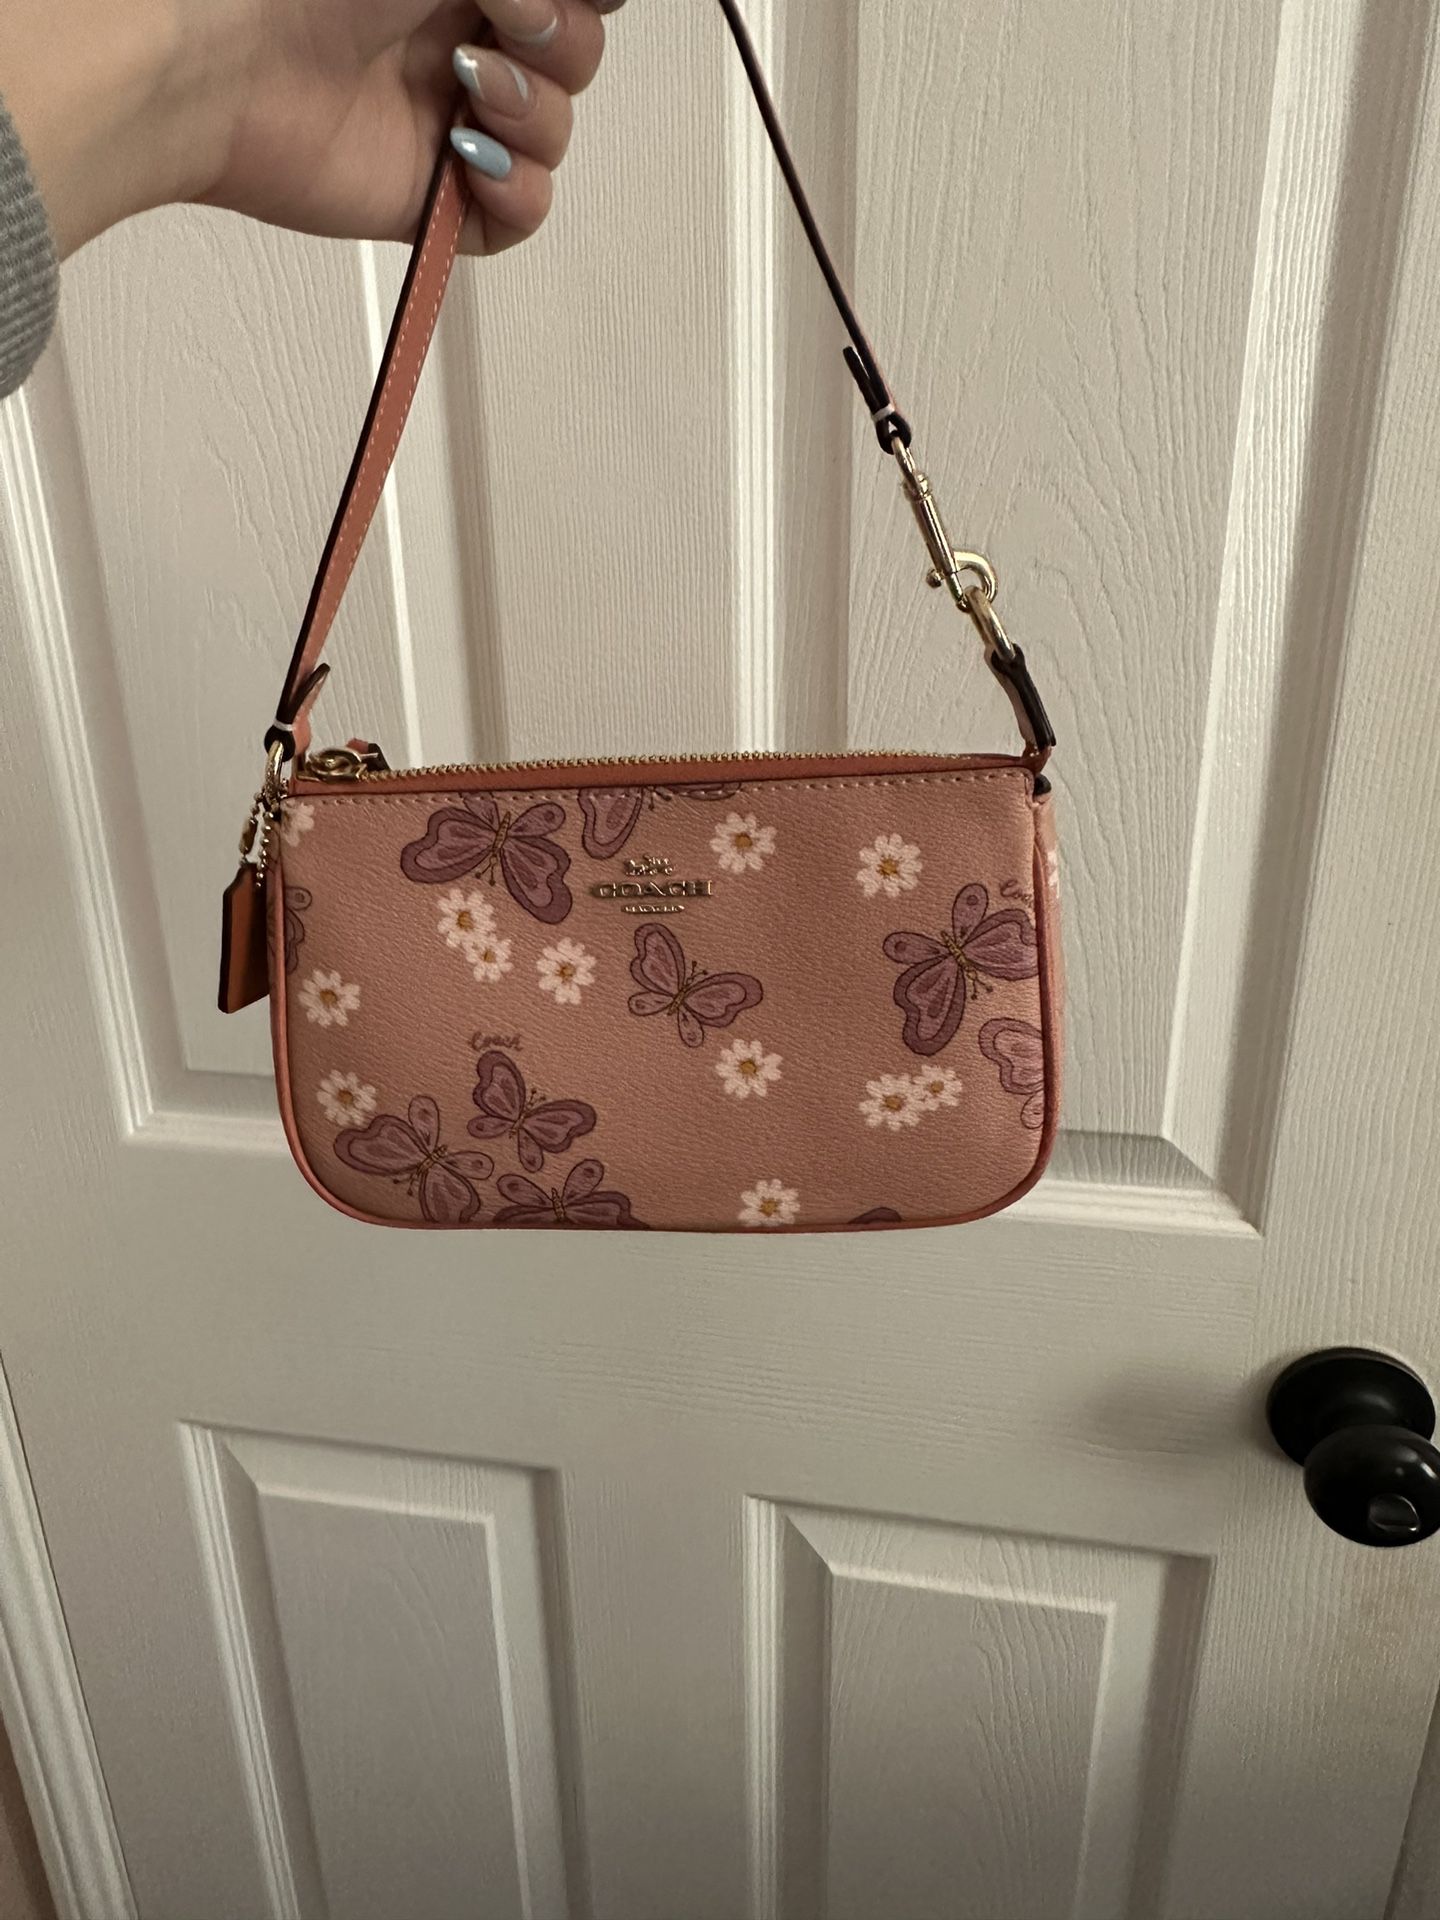 Coach Butterfly Floral Flowers Gallery Tote Purse for Sale in Orlando, FL -  OfferUp